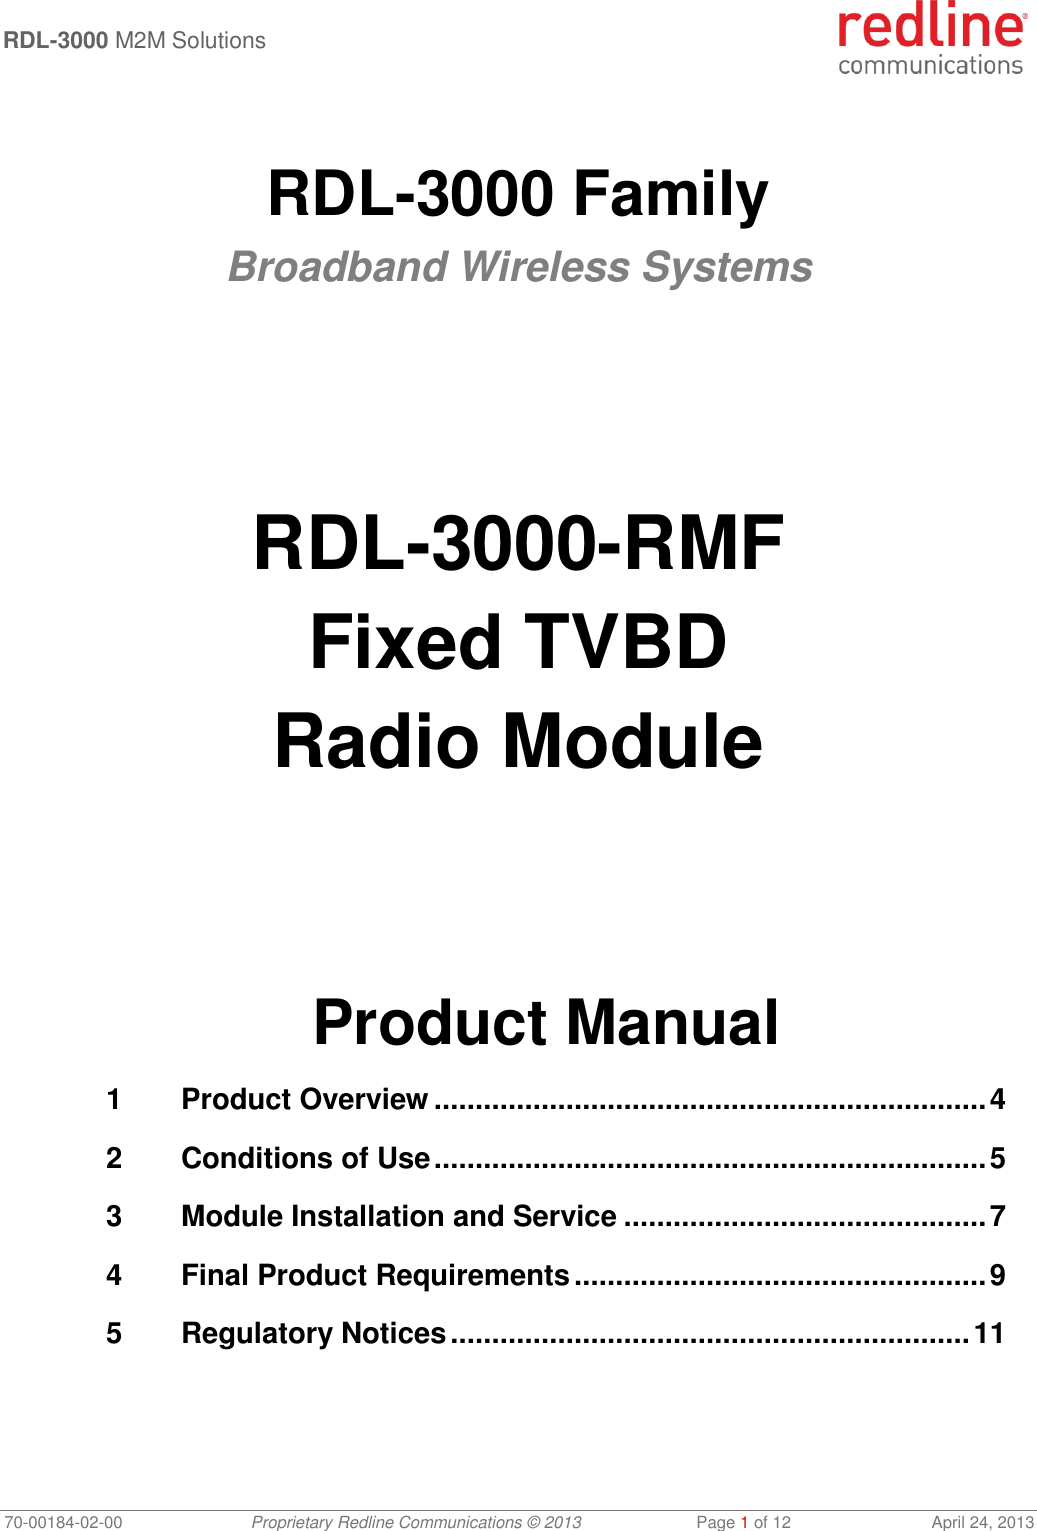  RDL-3000 M2M Solutions   70-00184-02-00 Proprietary Redline Communications © 2013  Page 1 of 12  April 24, 2013  RDL-3000 Family Broadband Wireless Systems       RDL-3000-RMF Fixed TVBD Radio Module       Product Manual 1 Product Overview ................................................................... 4 2 Conditions of Use ................................................................... 5 3 Module Installation and Service ............................................ 7 4 Final Product Requirements .................................................. 9 5 Regulatory Notices ............................................................... 11 